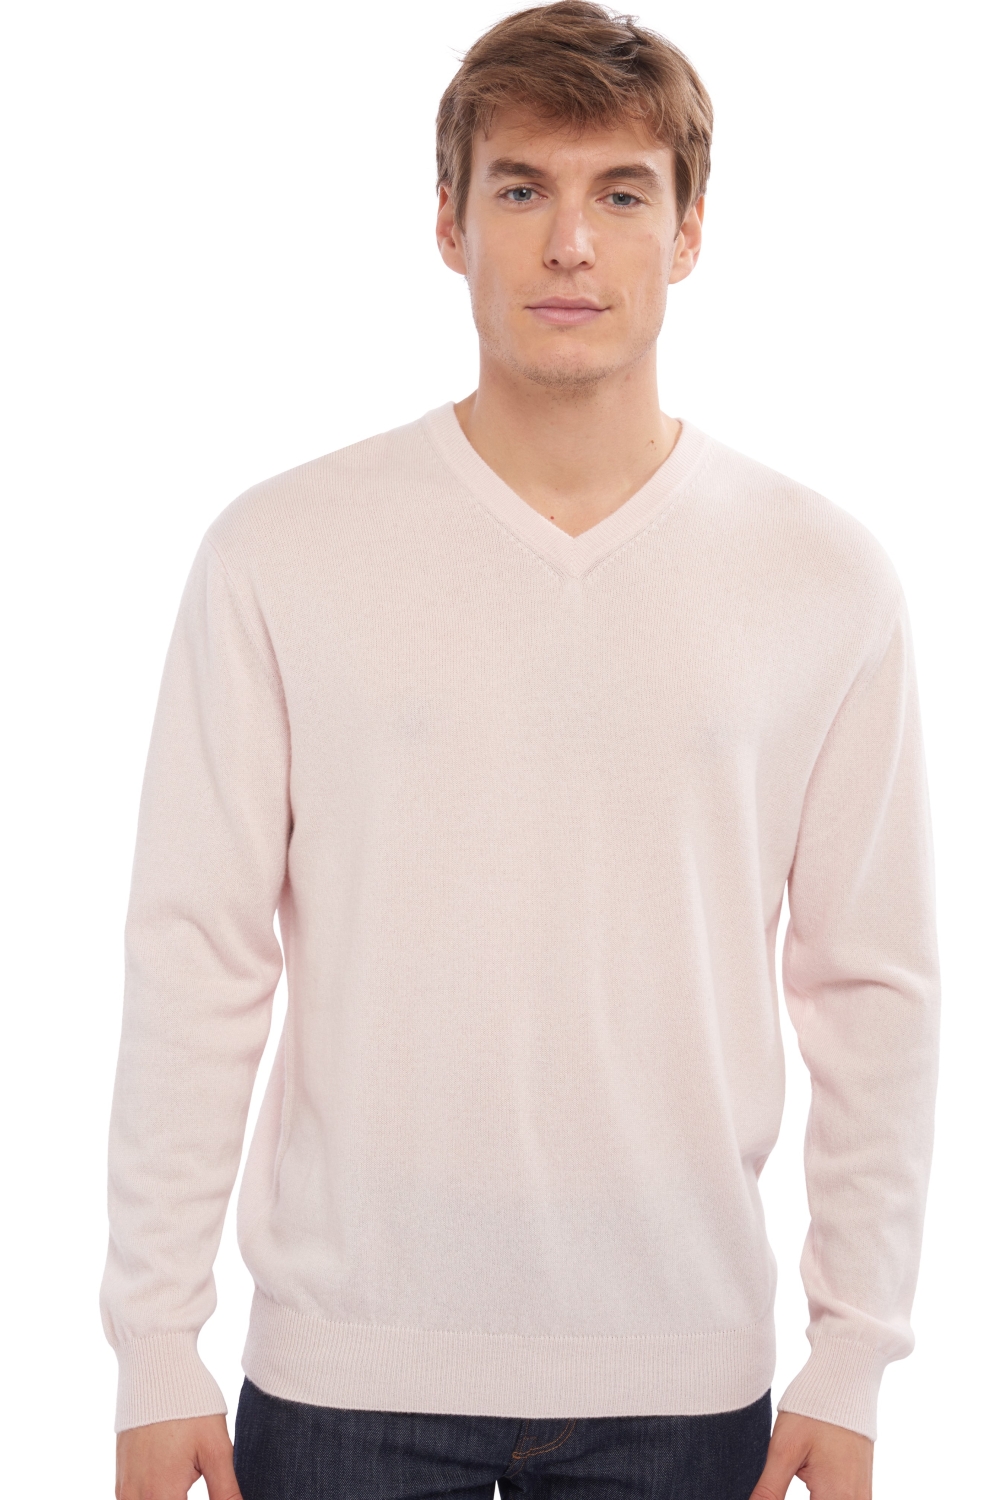 Cachemire pull homme col v gaspard rose pale xs